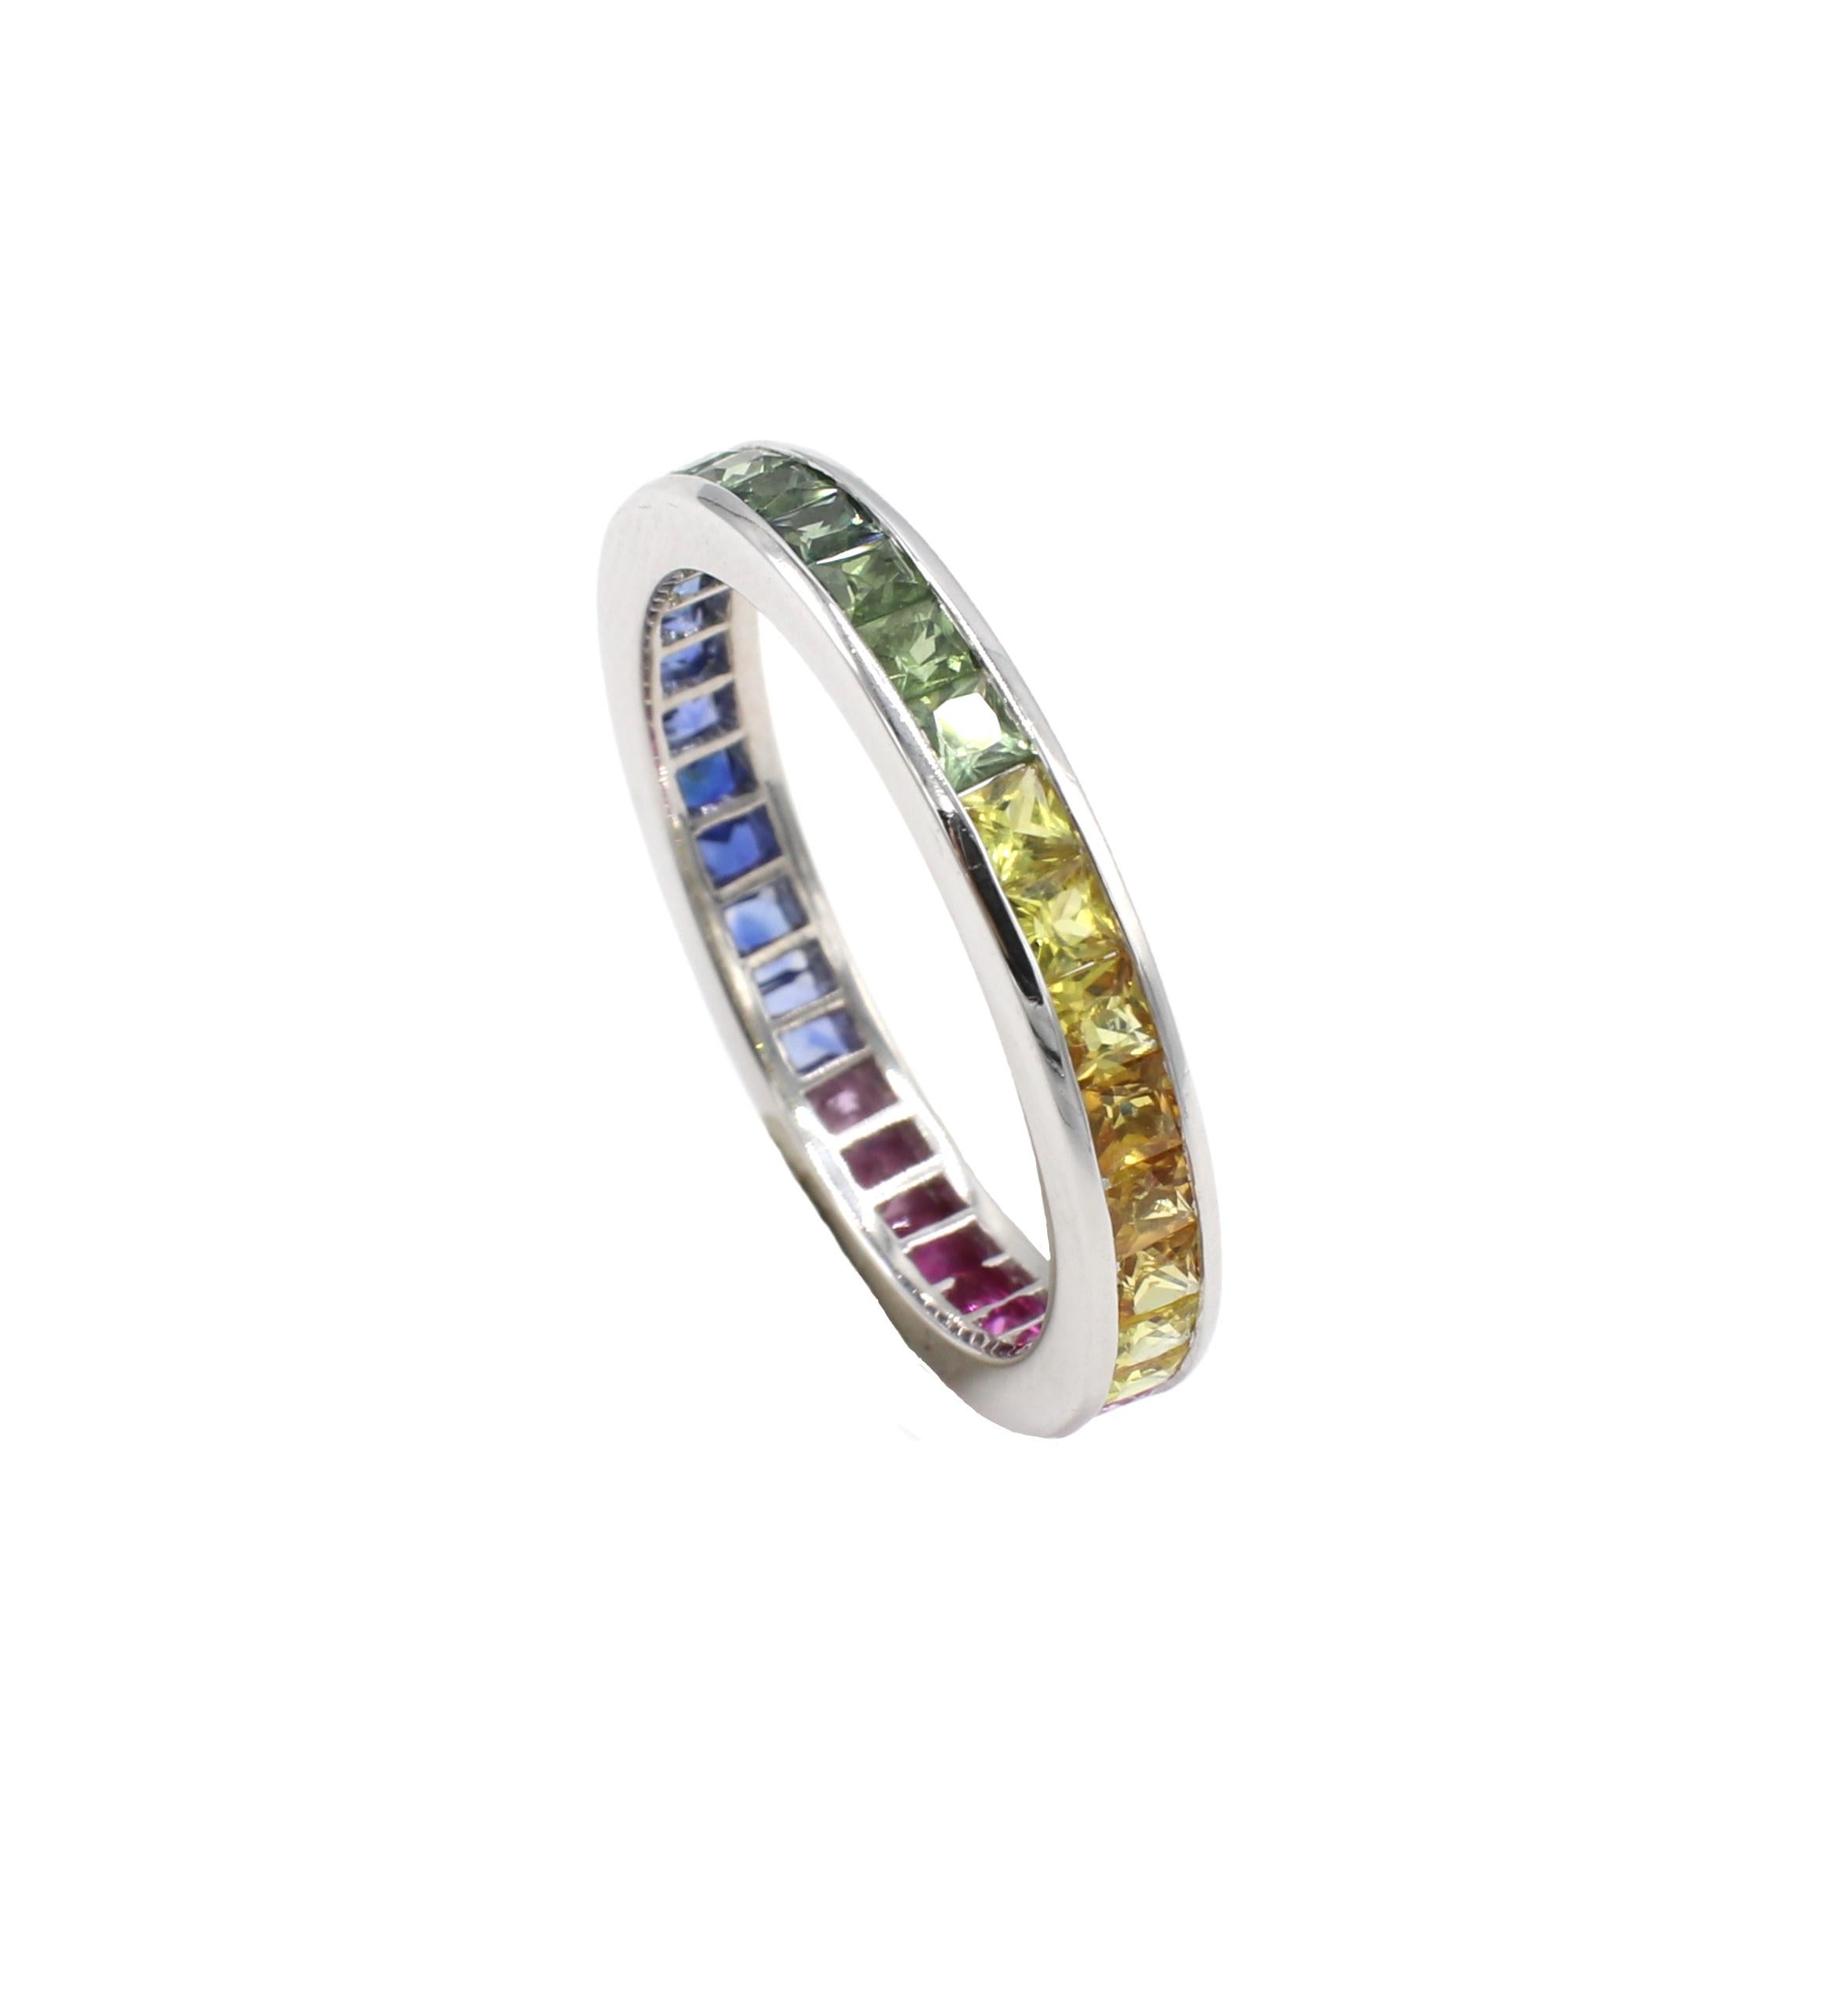 18 Karat White Gold Multi-Color Rainbow Sapphire Channel Set Eternity Band Ring 
Metal: 18k white gold
Weight: 3.72 grams
Size: 9 (US)
Width: 3.5mm
Sapphires: Multi-colored (pink, blue, yellow, green) sapphires

